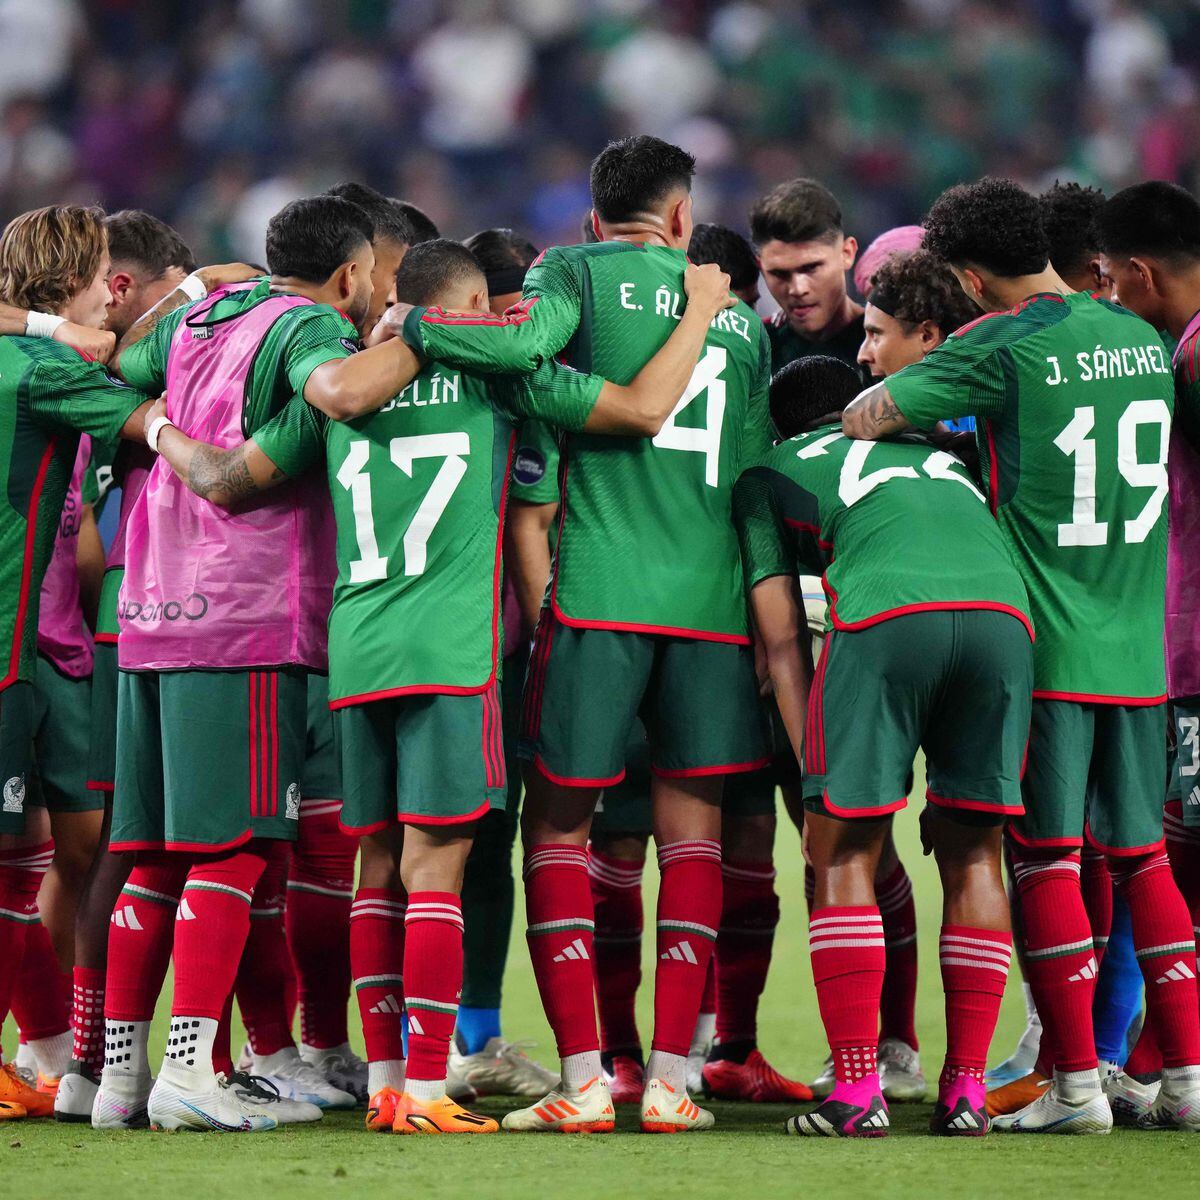 Players of National team of Mexico U 17 celebrate their